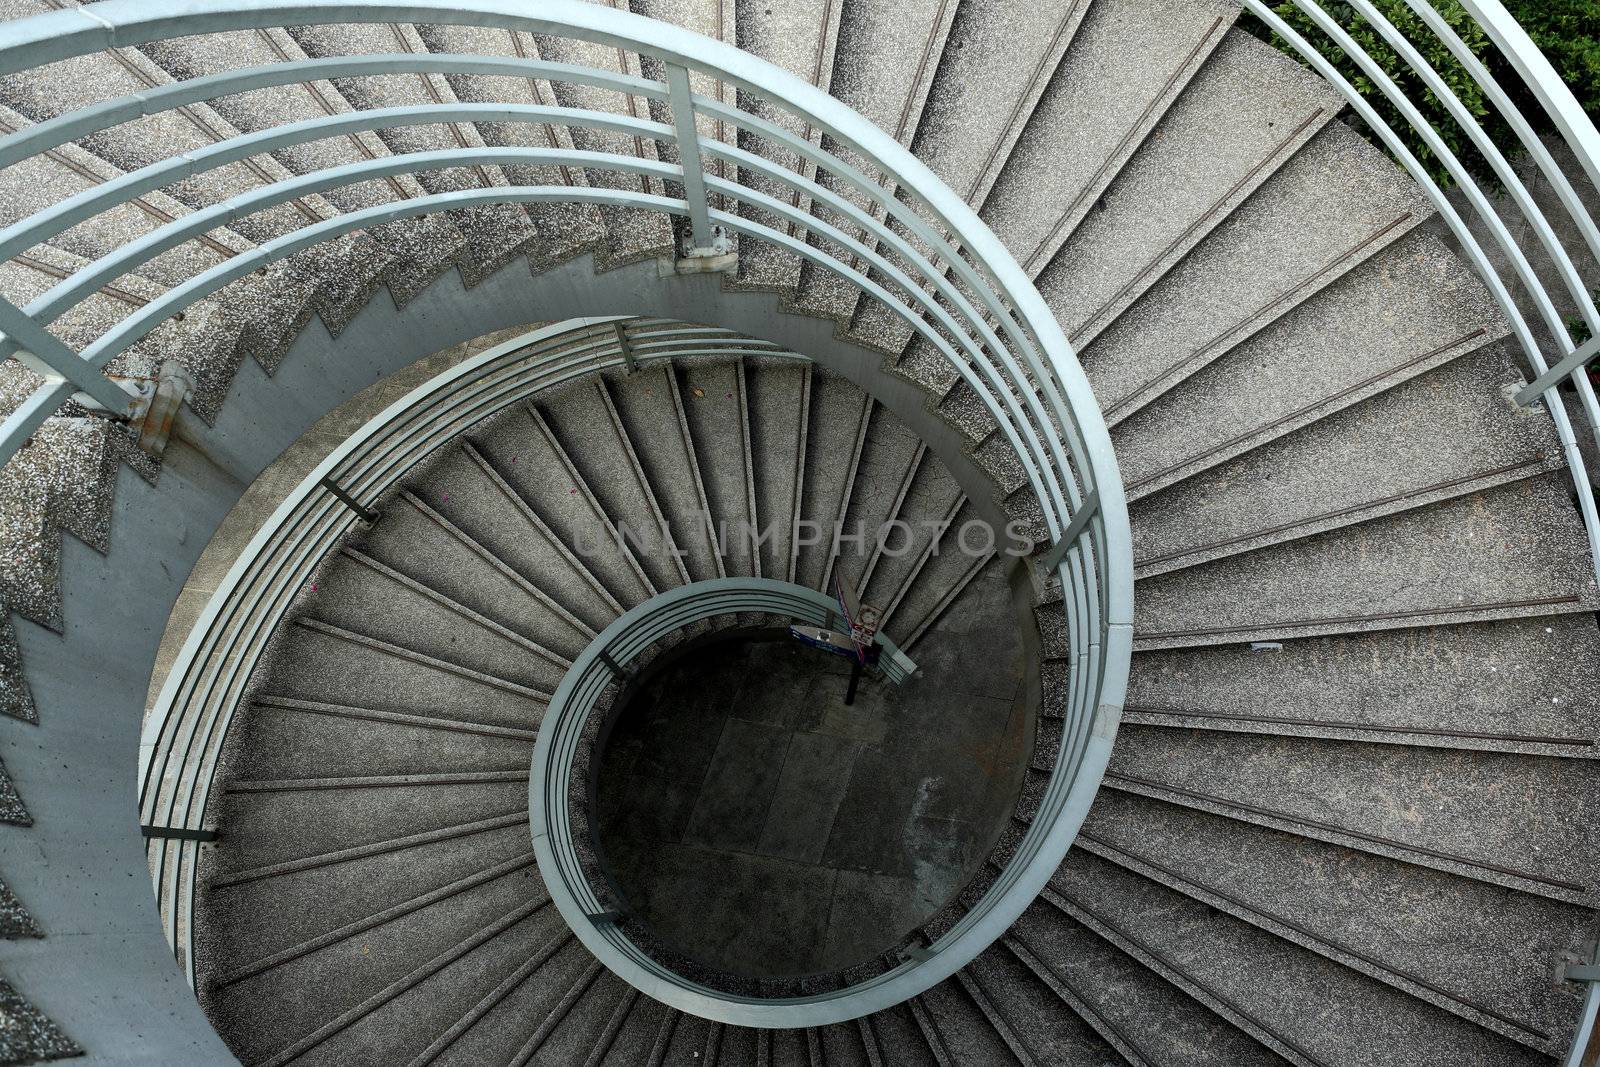 It is the beautiful spiraling stairs